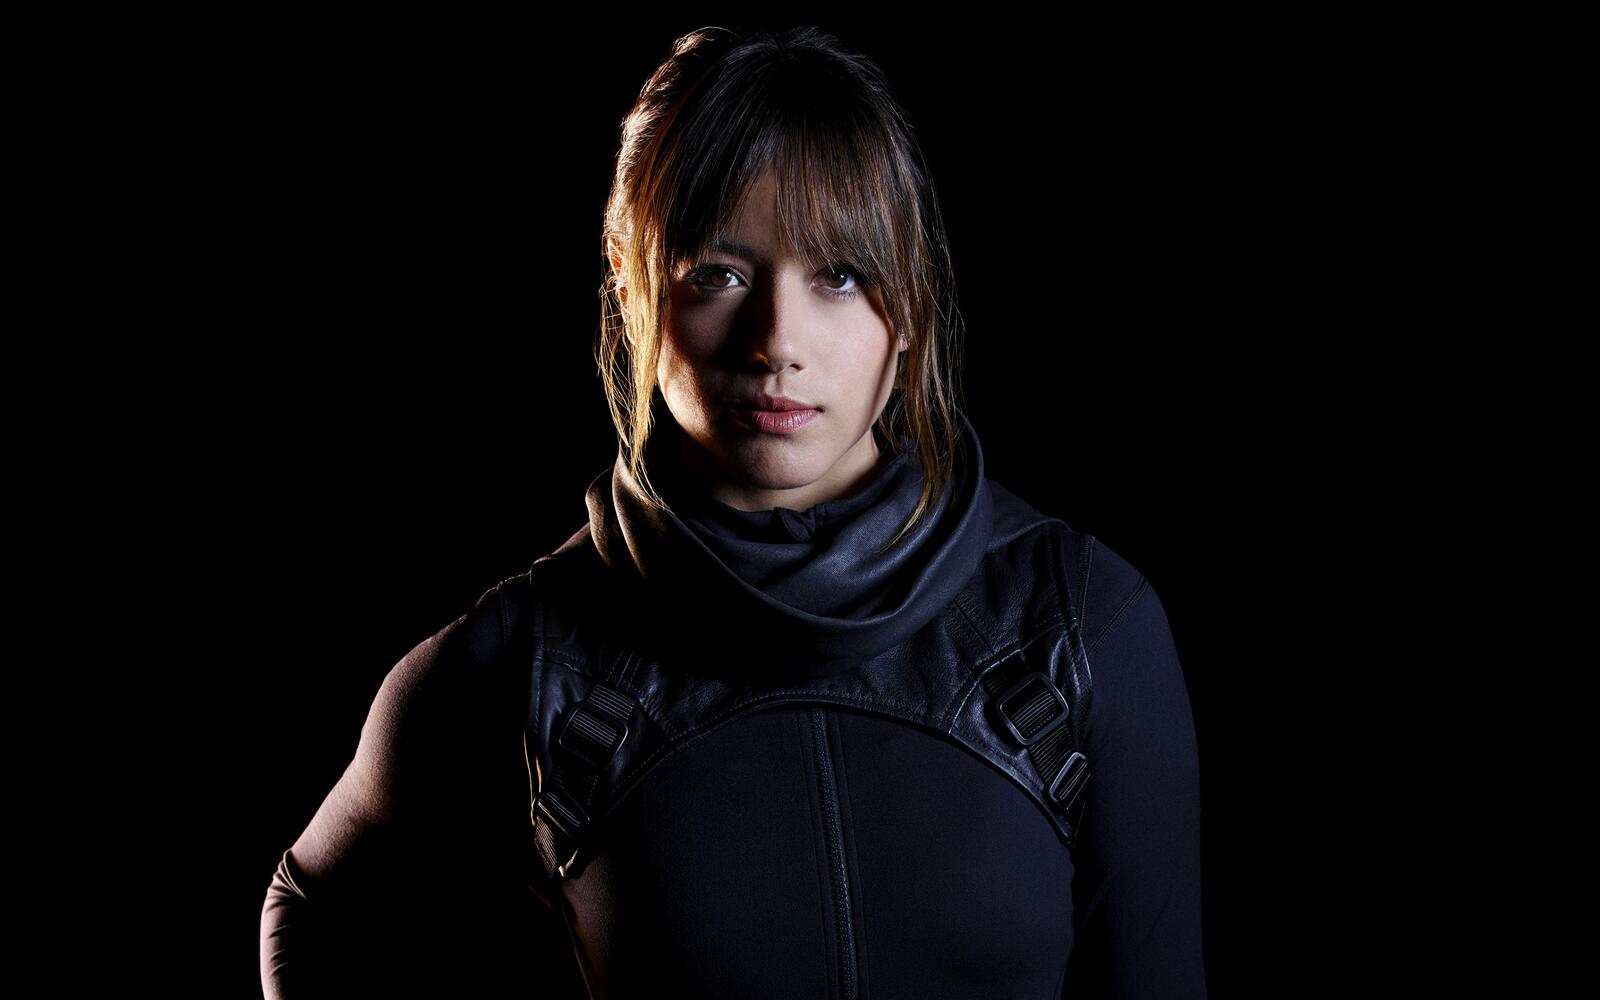 Wallpapers chloe bennet movies Agents Of Shield on the desktop